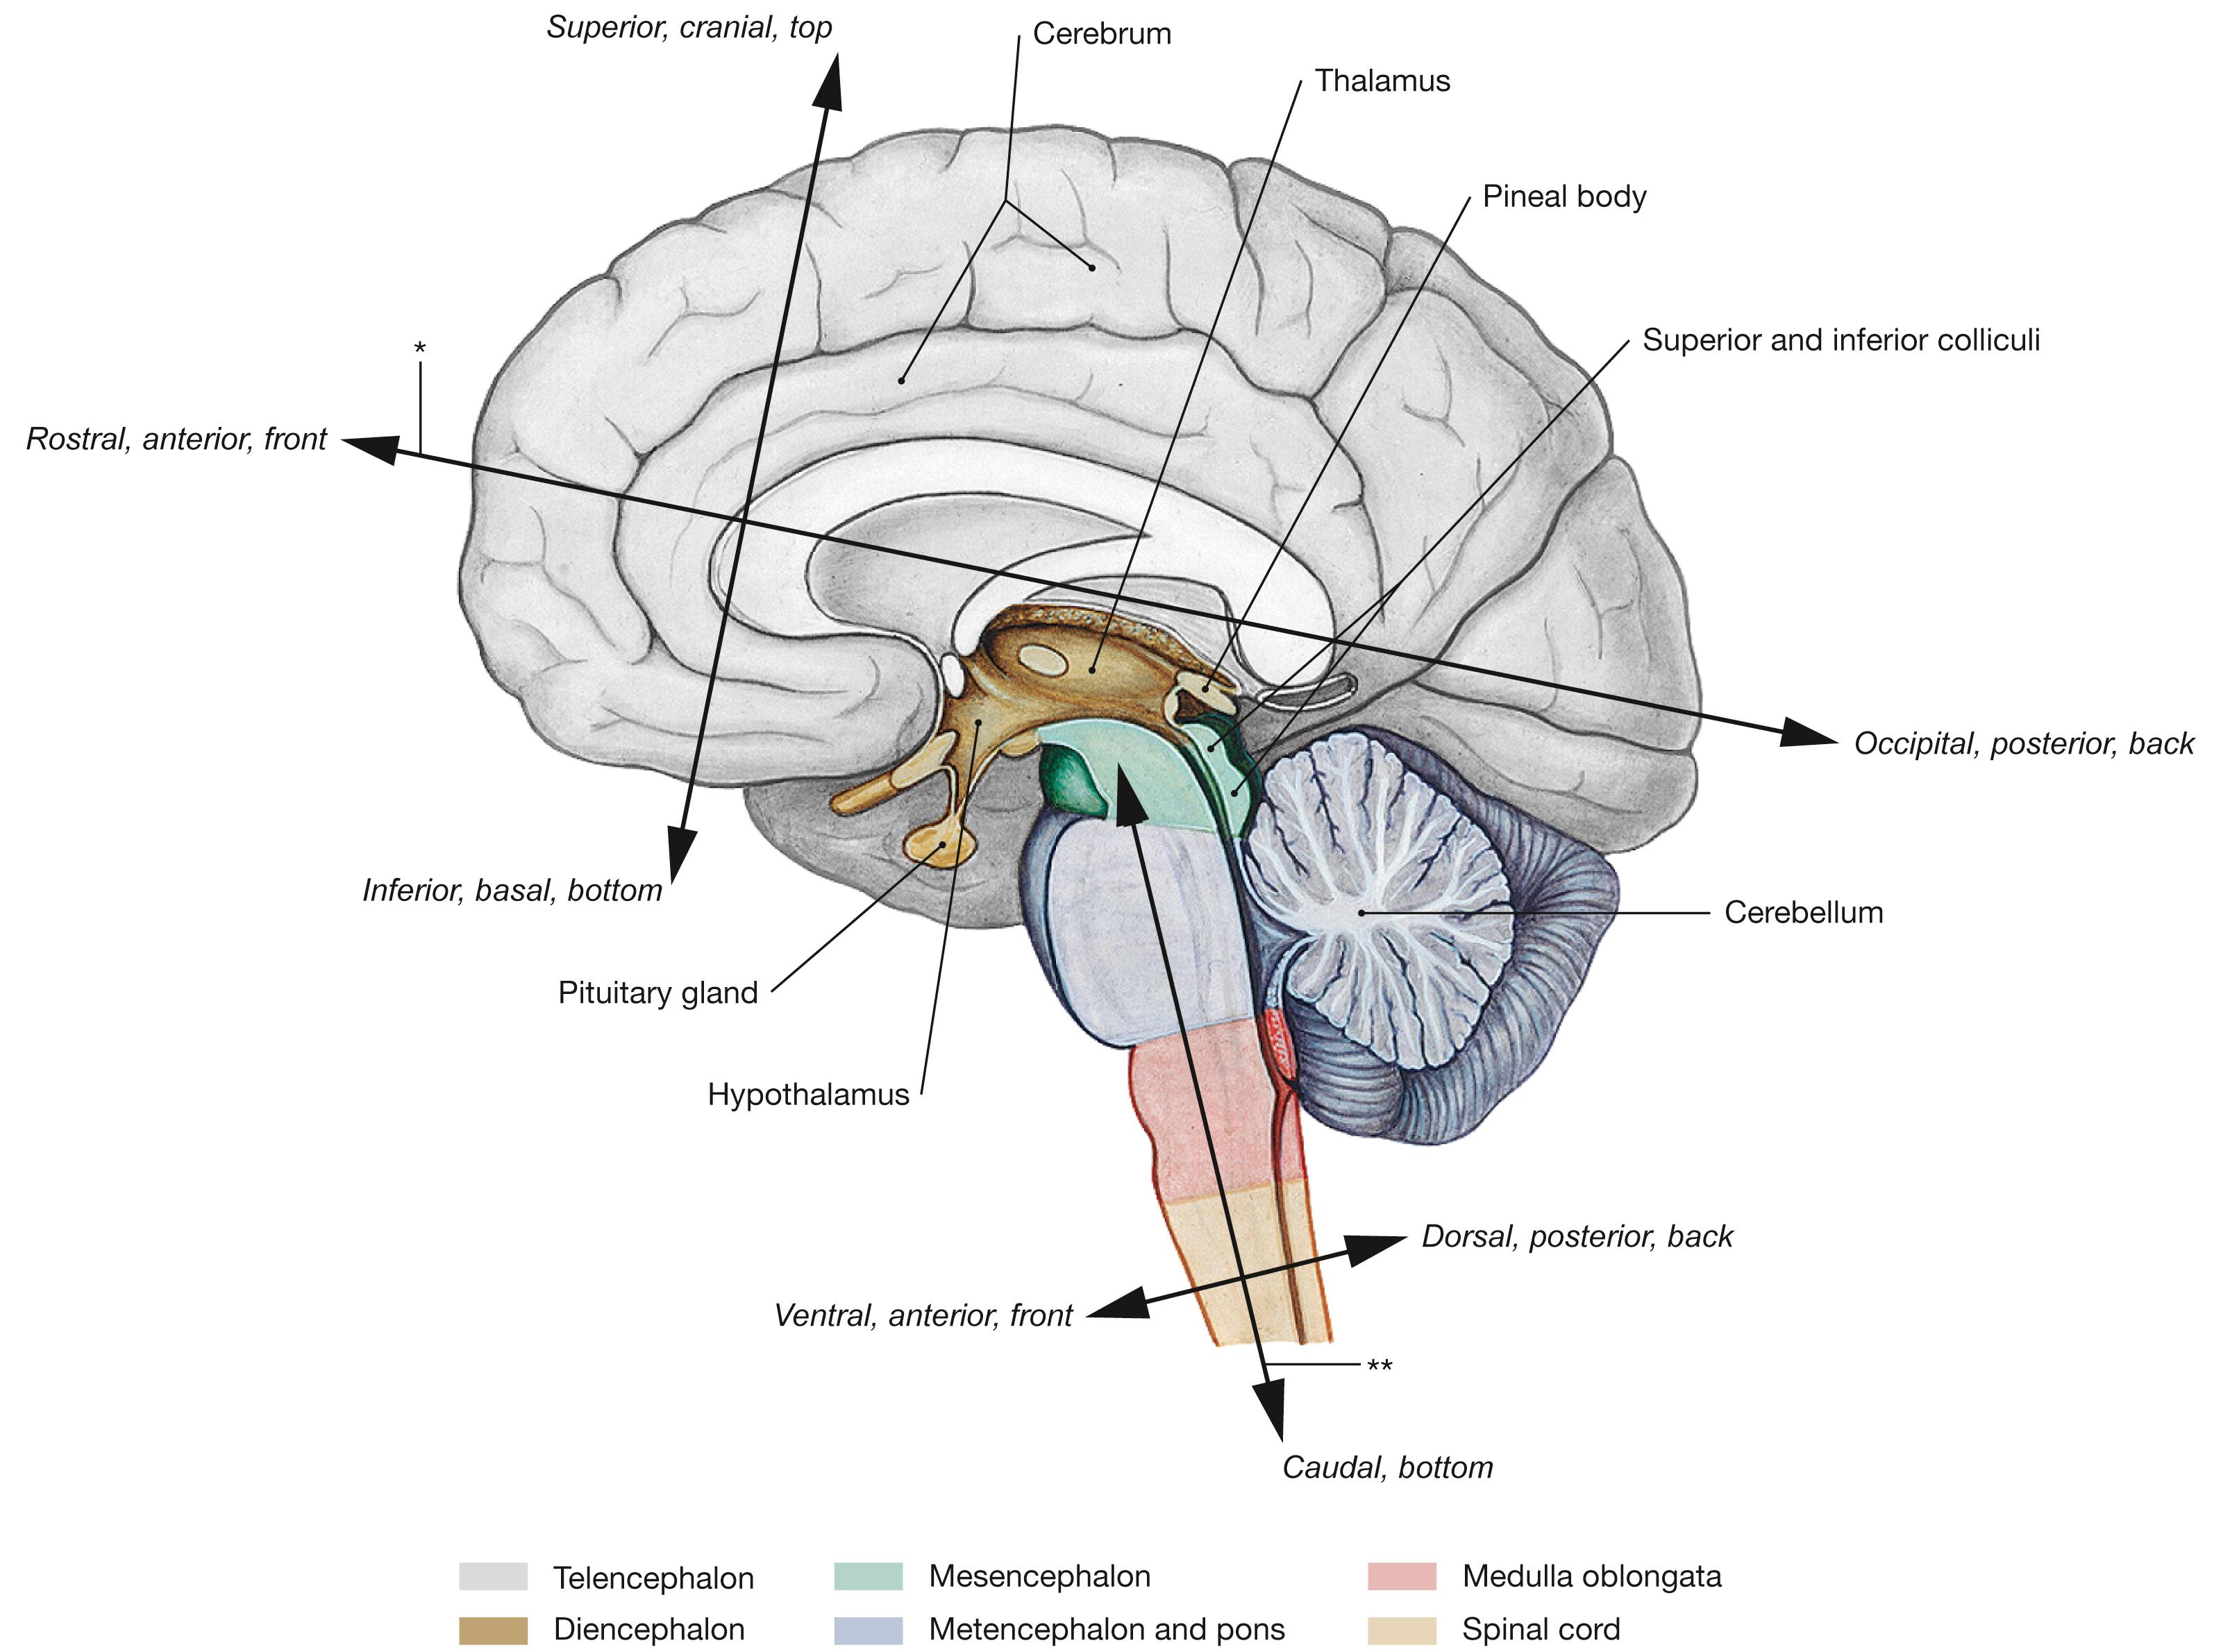 Fig. 12.1, Positional information and organization of the central nervous system (CNS; brain and spinal cord); median section.